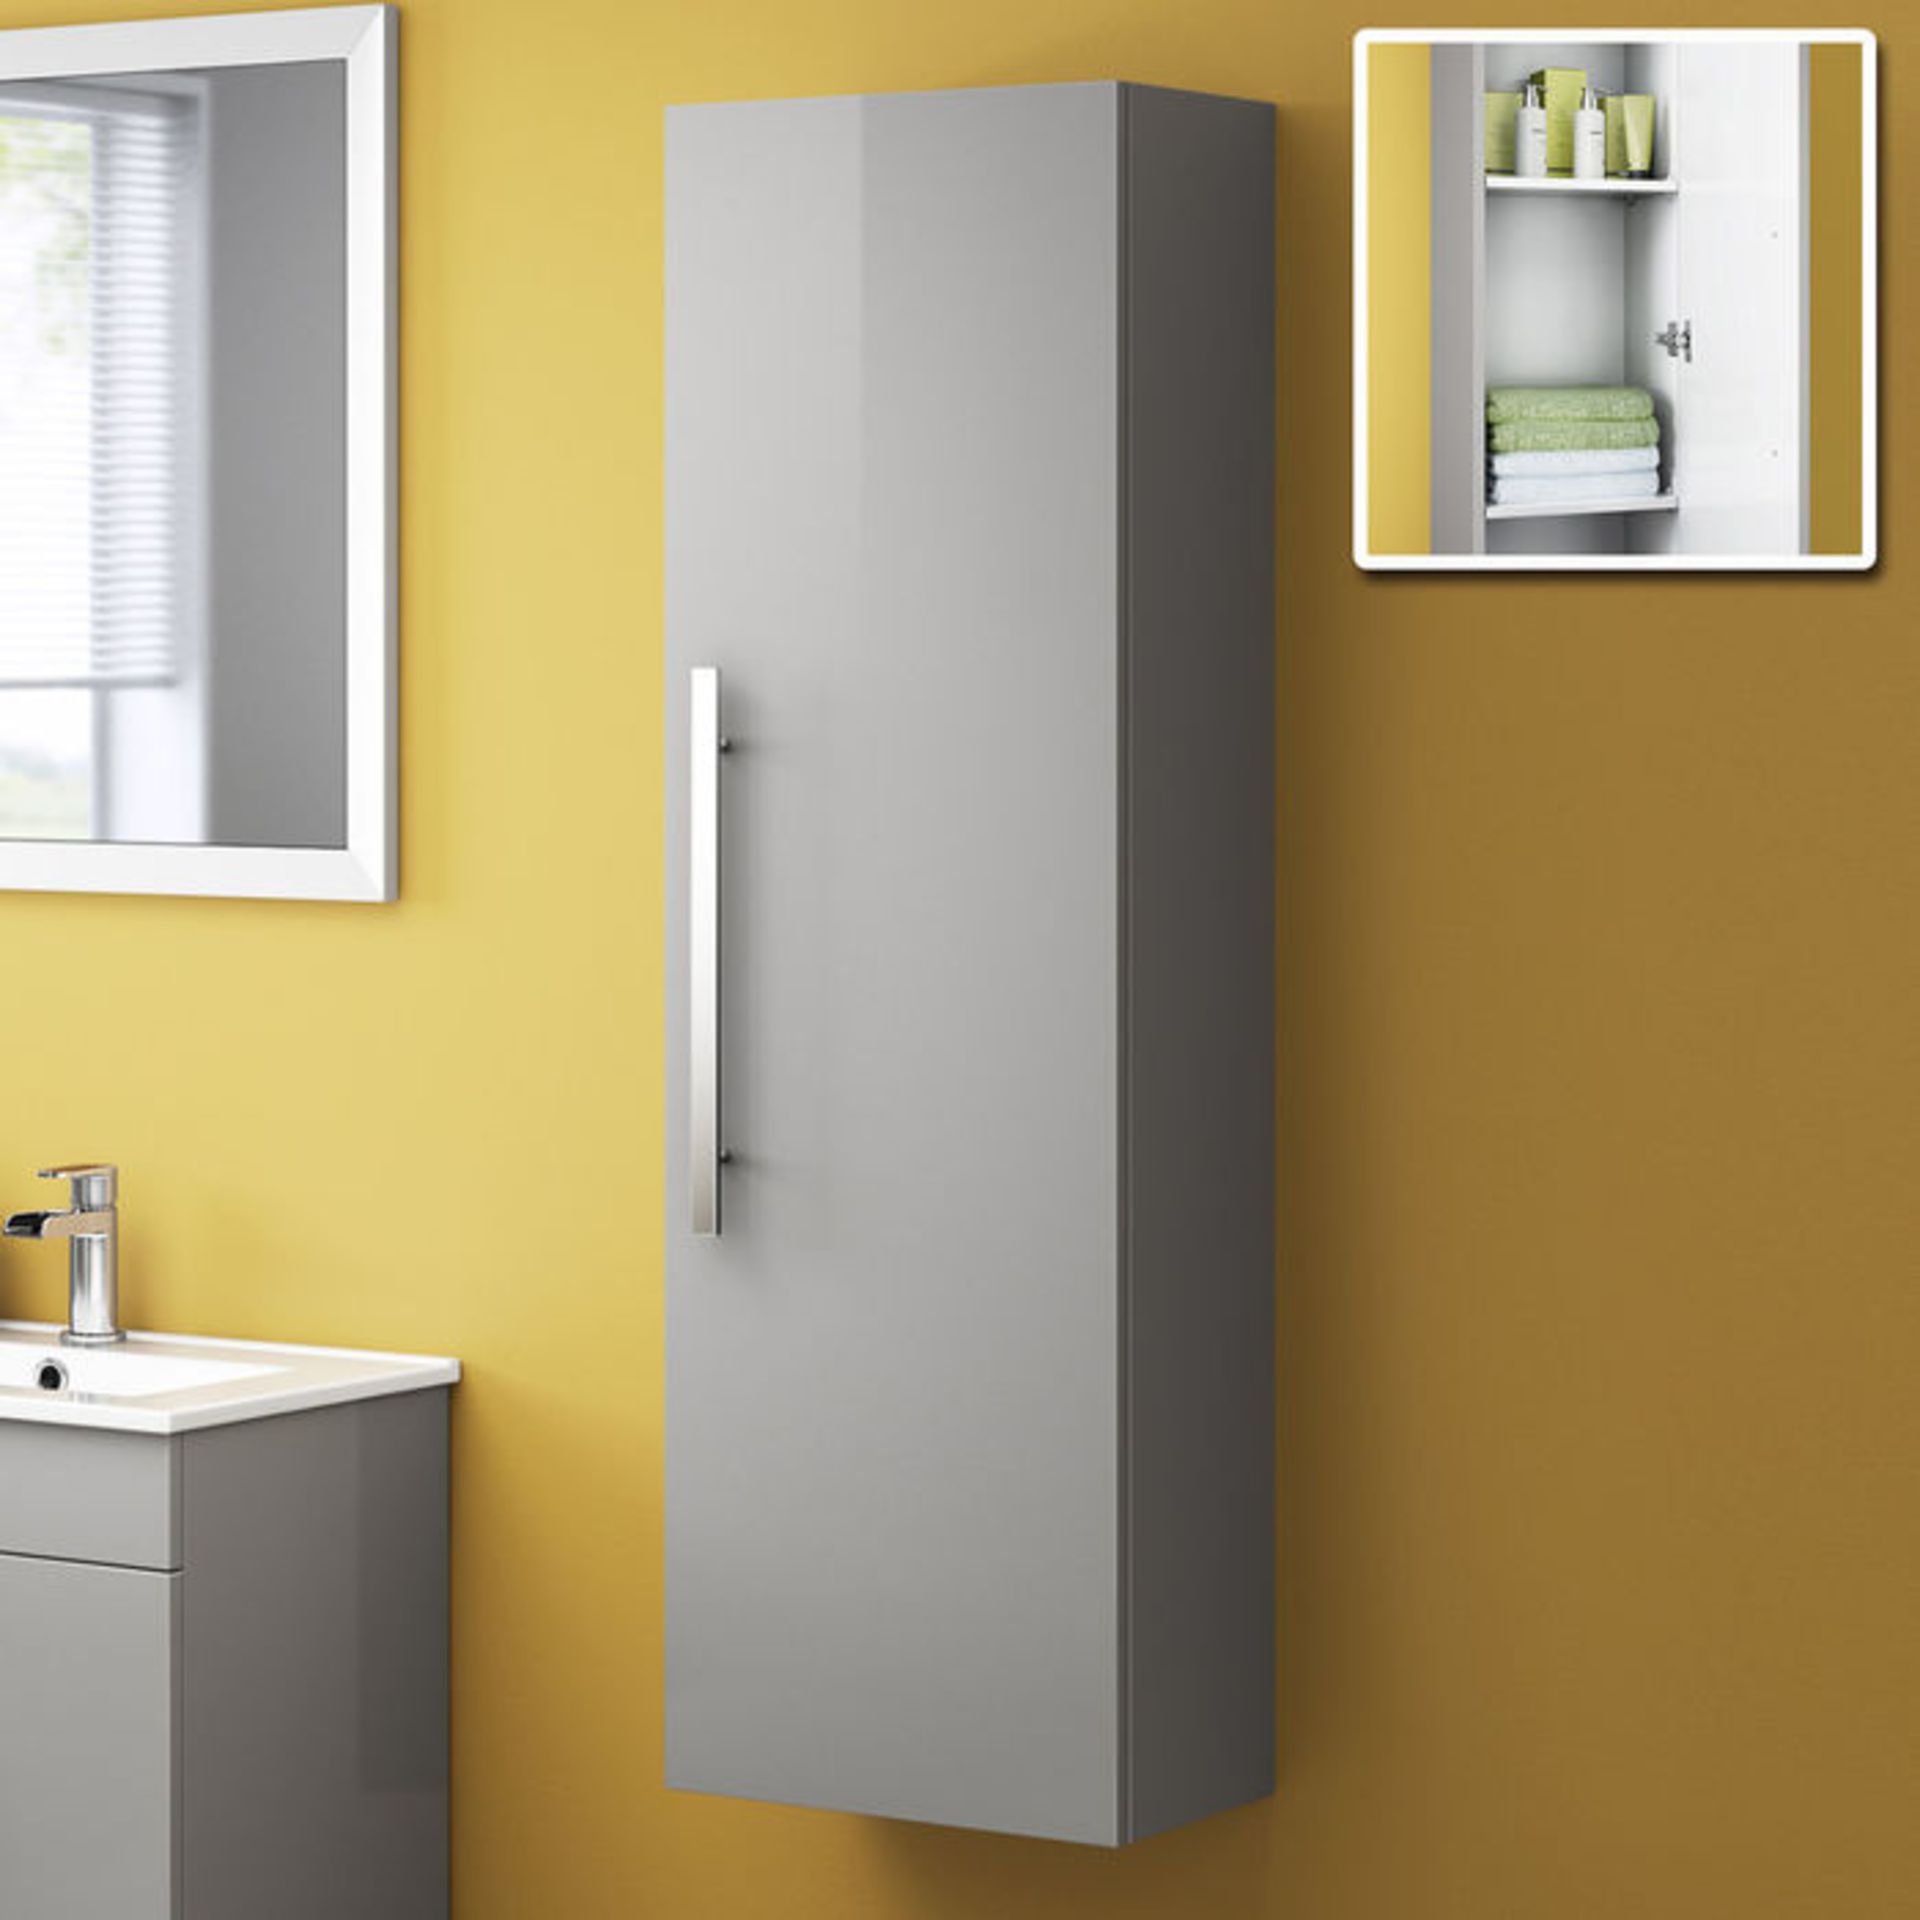 (TS266) 1200mm Avon Tall Wall Hung Storage Cabinet - Light Grey. RRP £299.99. Engineered with